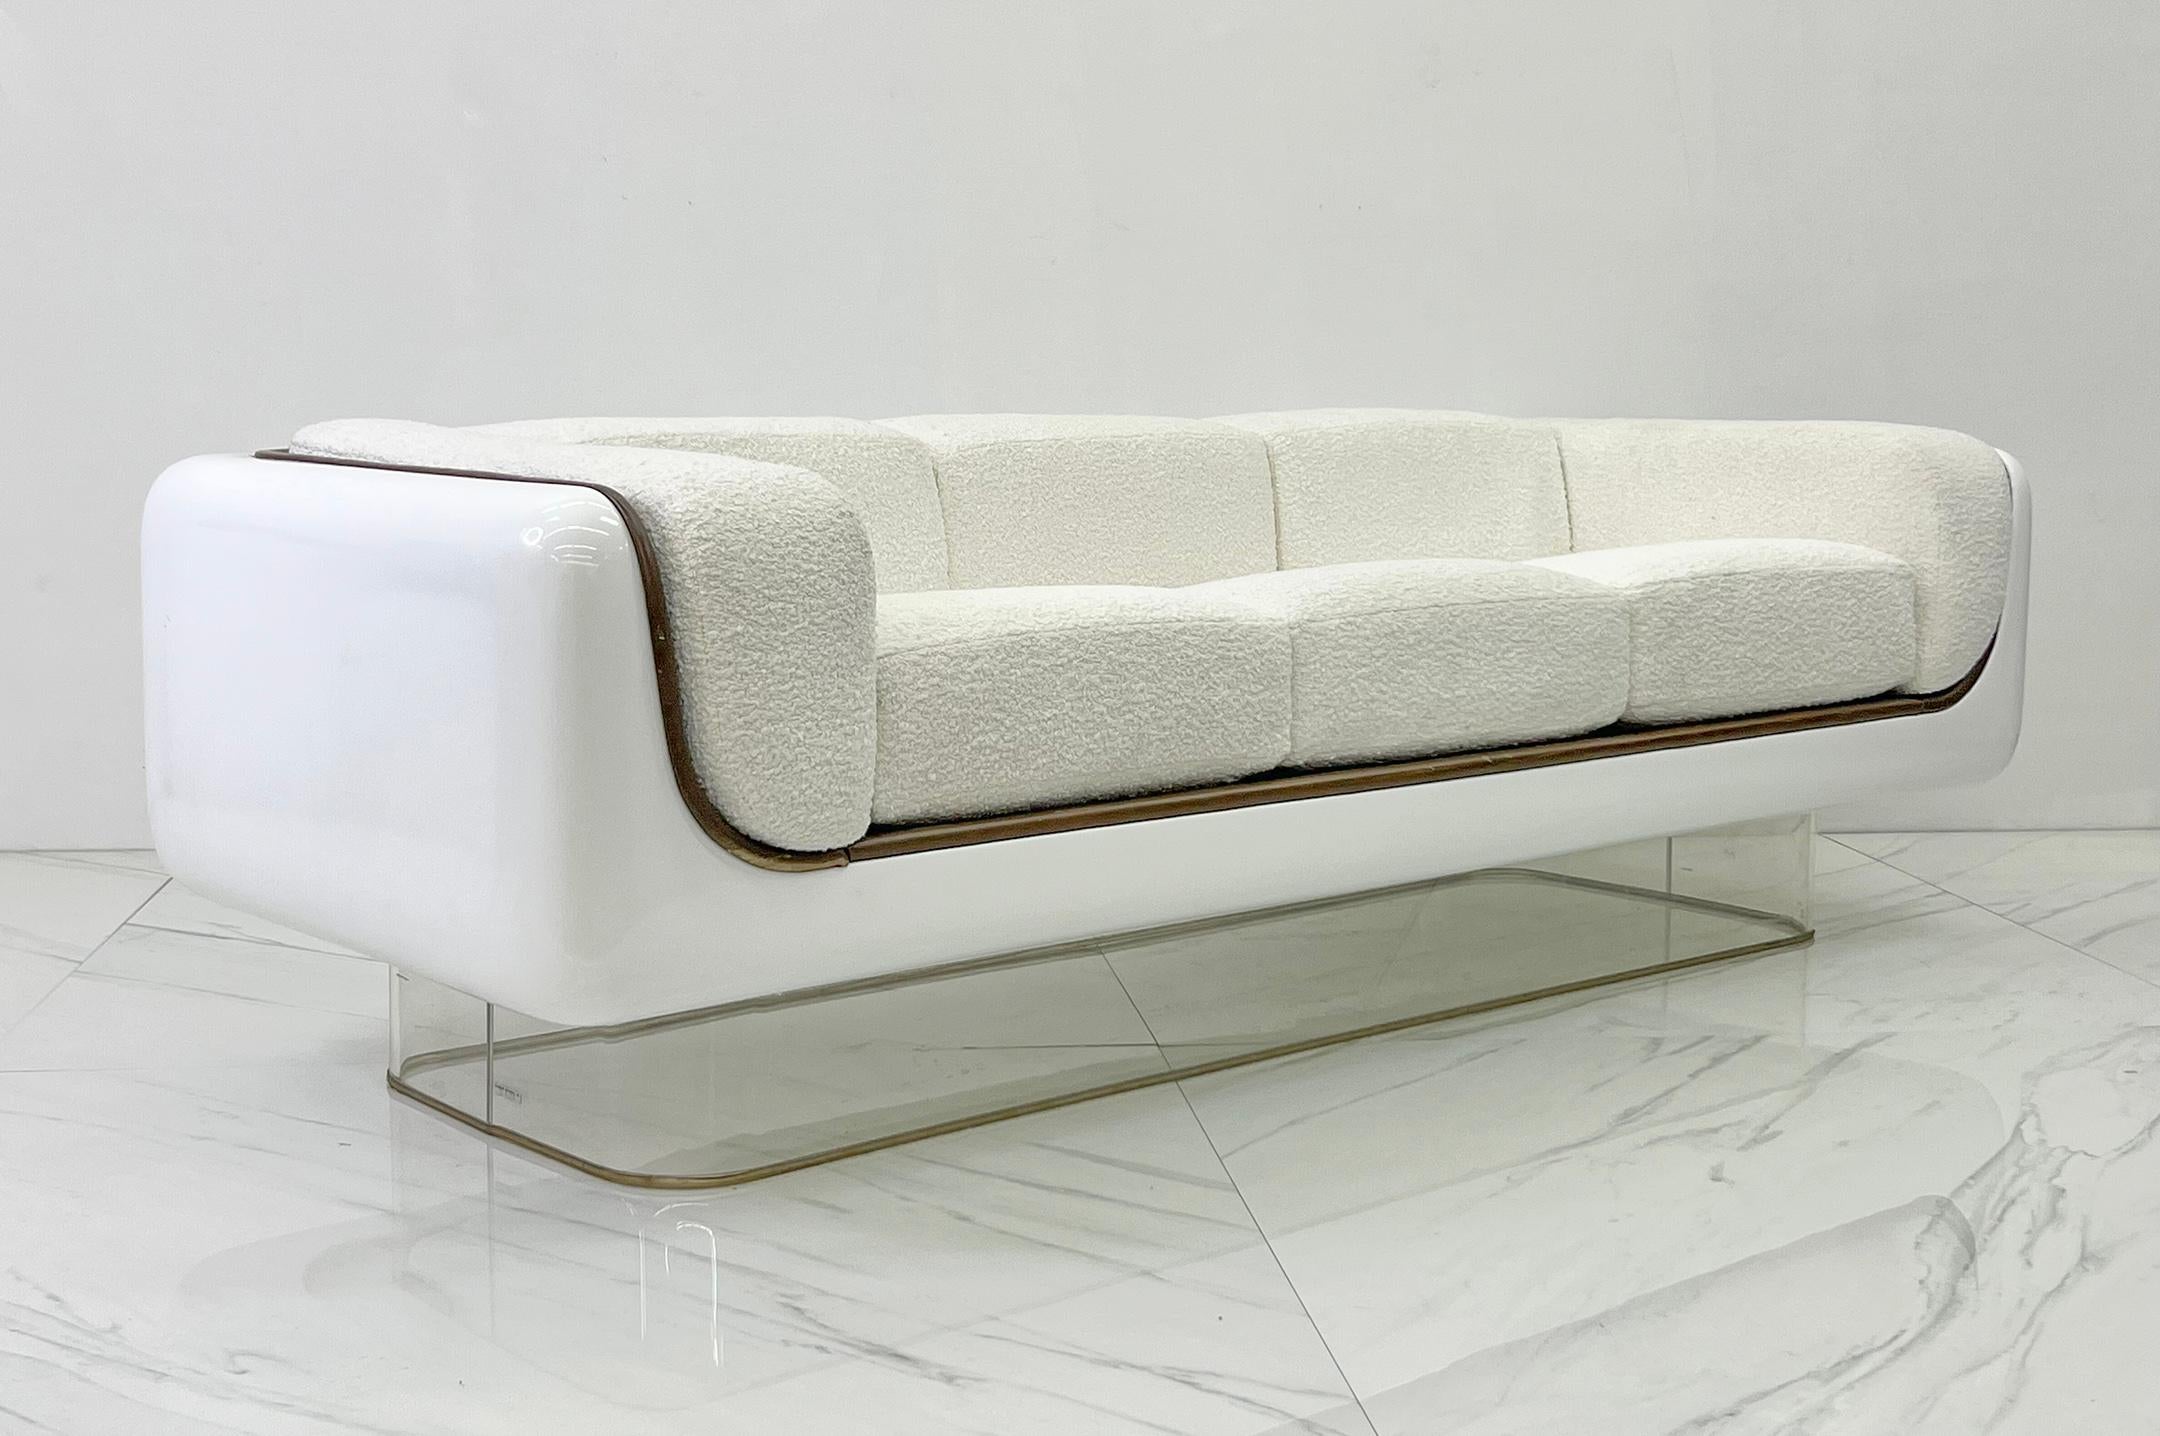 American William Andrus for Steelcase Space Age, Sofa, White Bouclé and Leather, 1970s